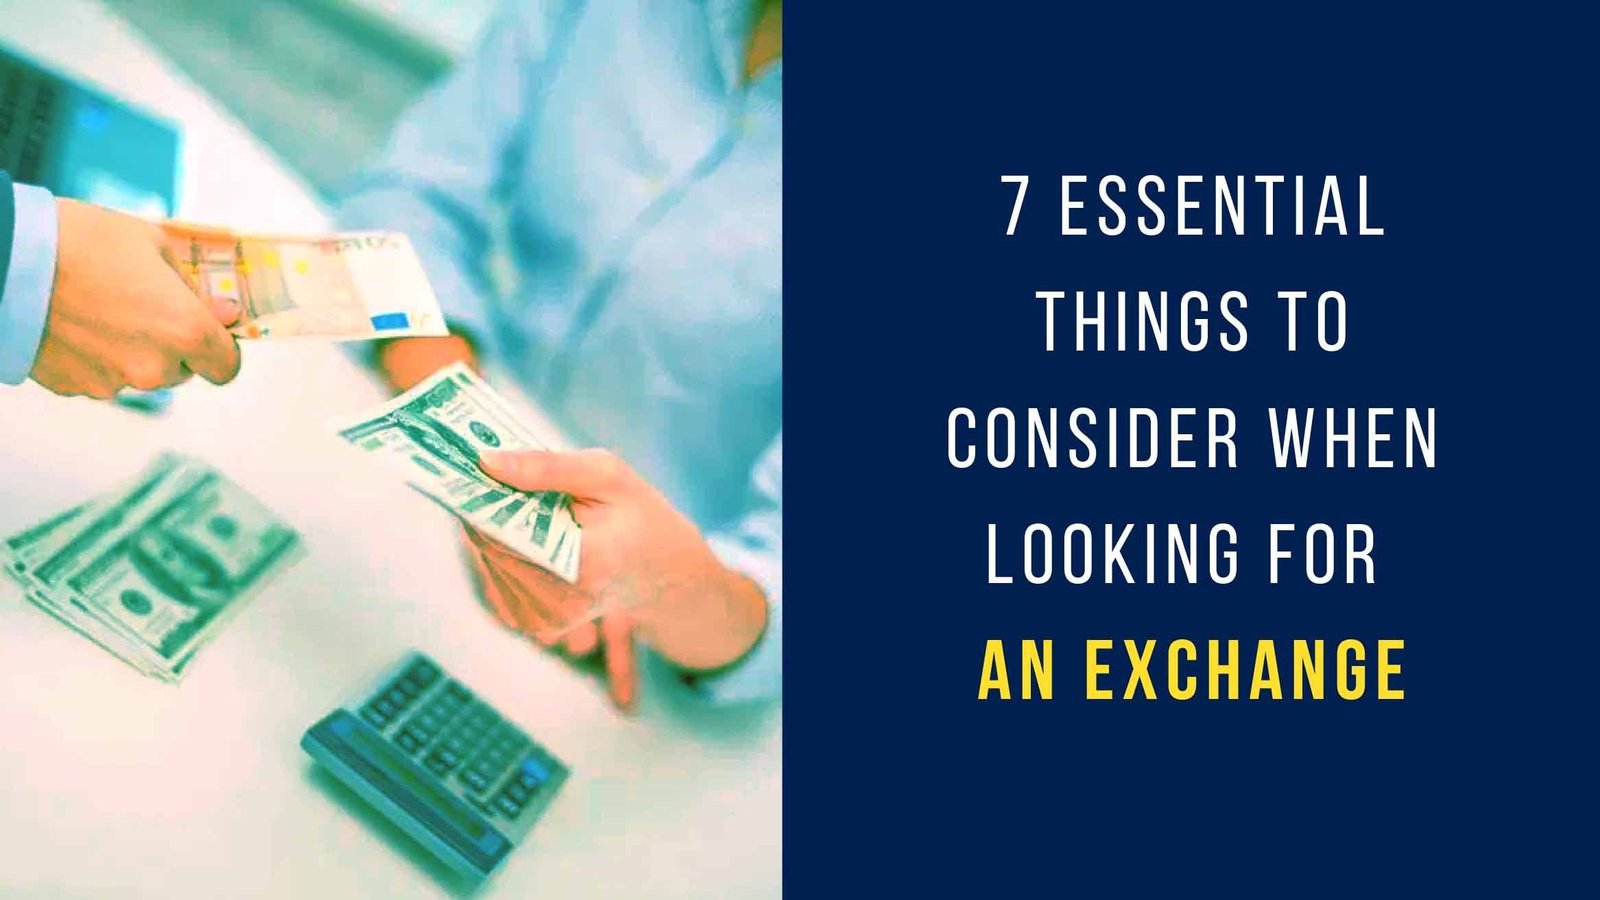 7 Essential Things to Consider When Looking for an Exchange - Pinnacle Weekly